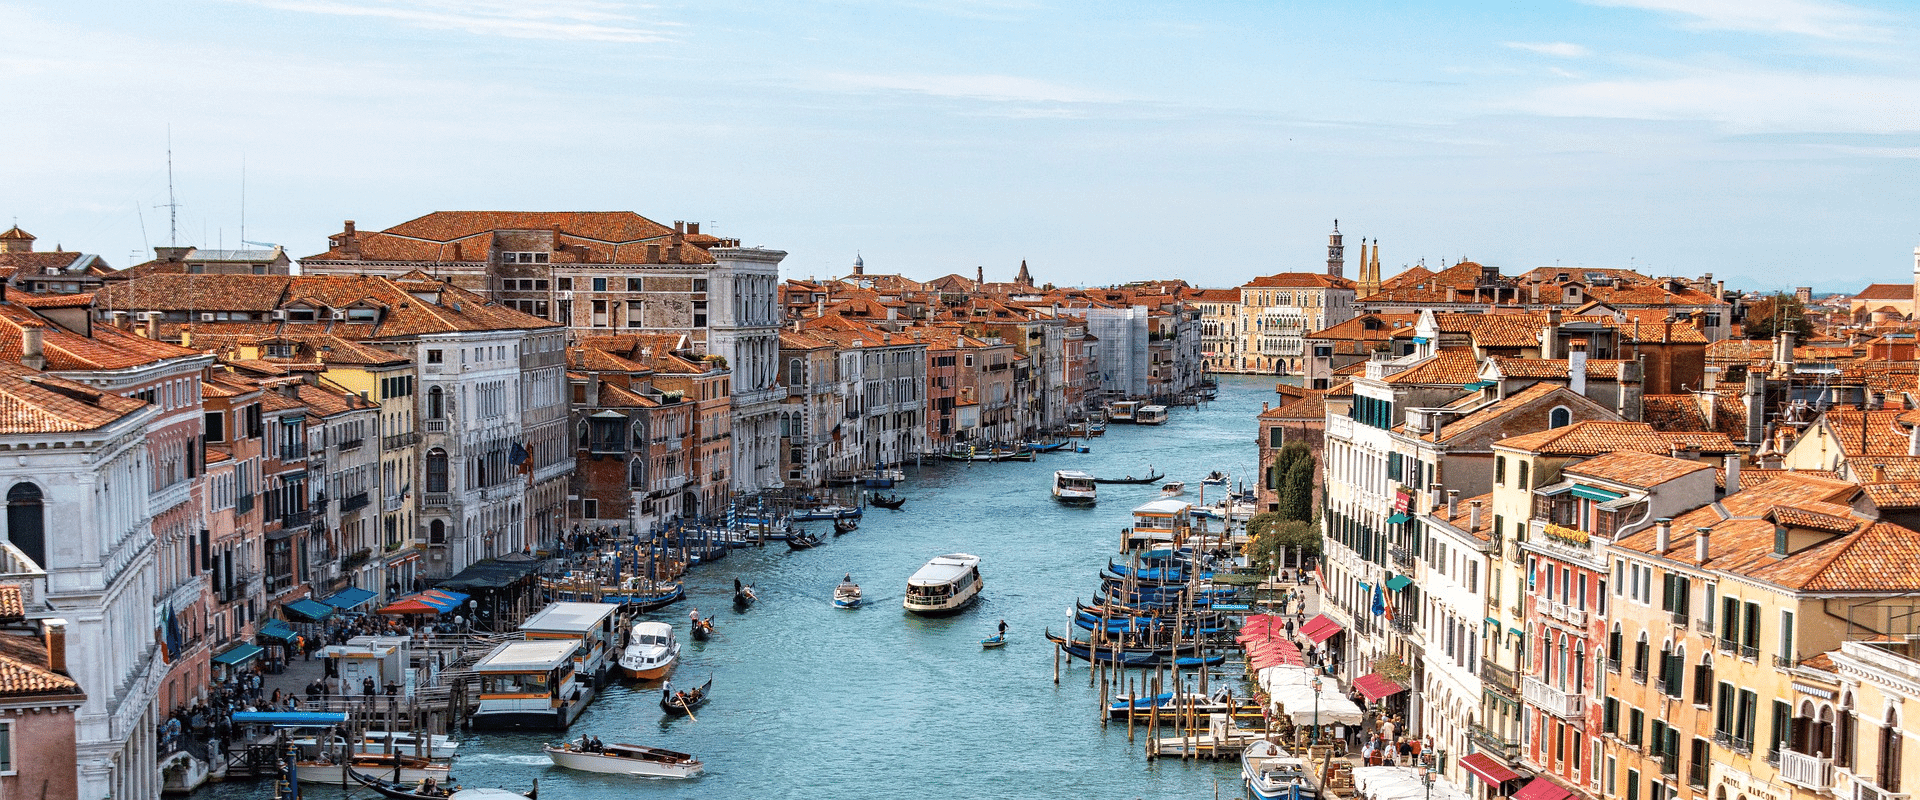 The astonishing Venice, why you should visit it in 2022?